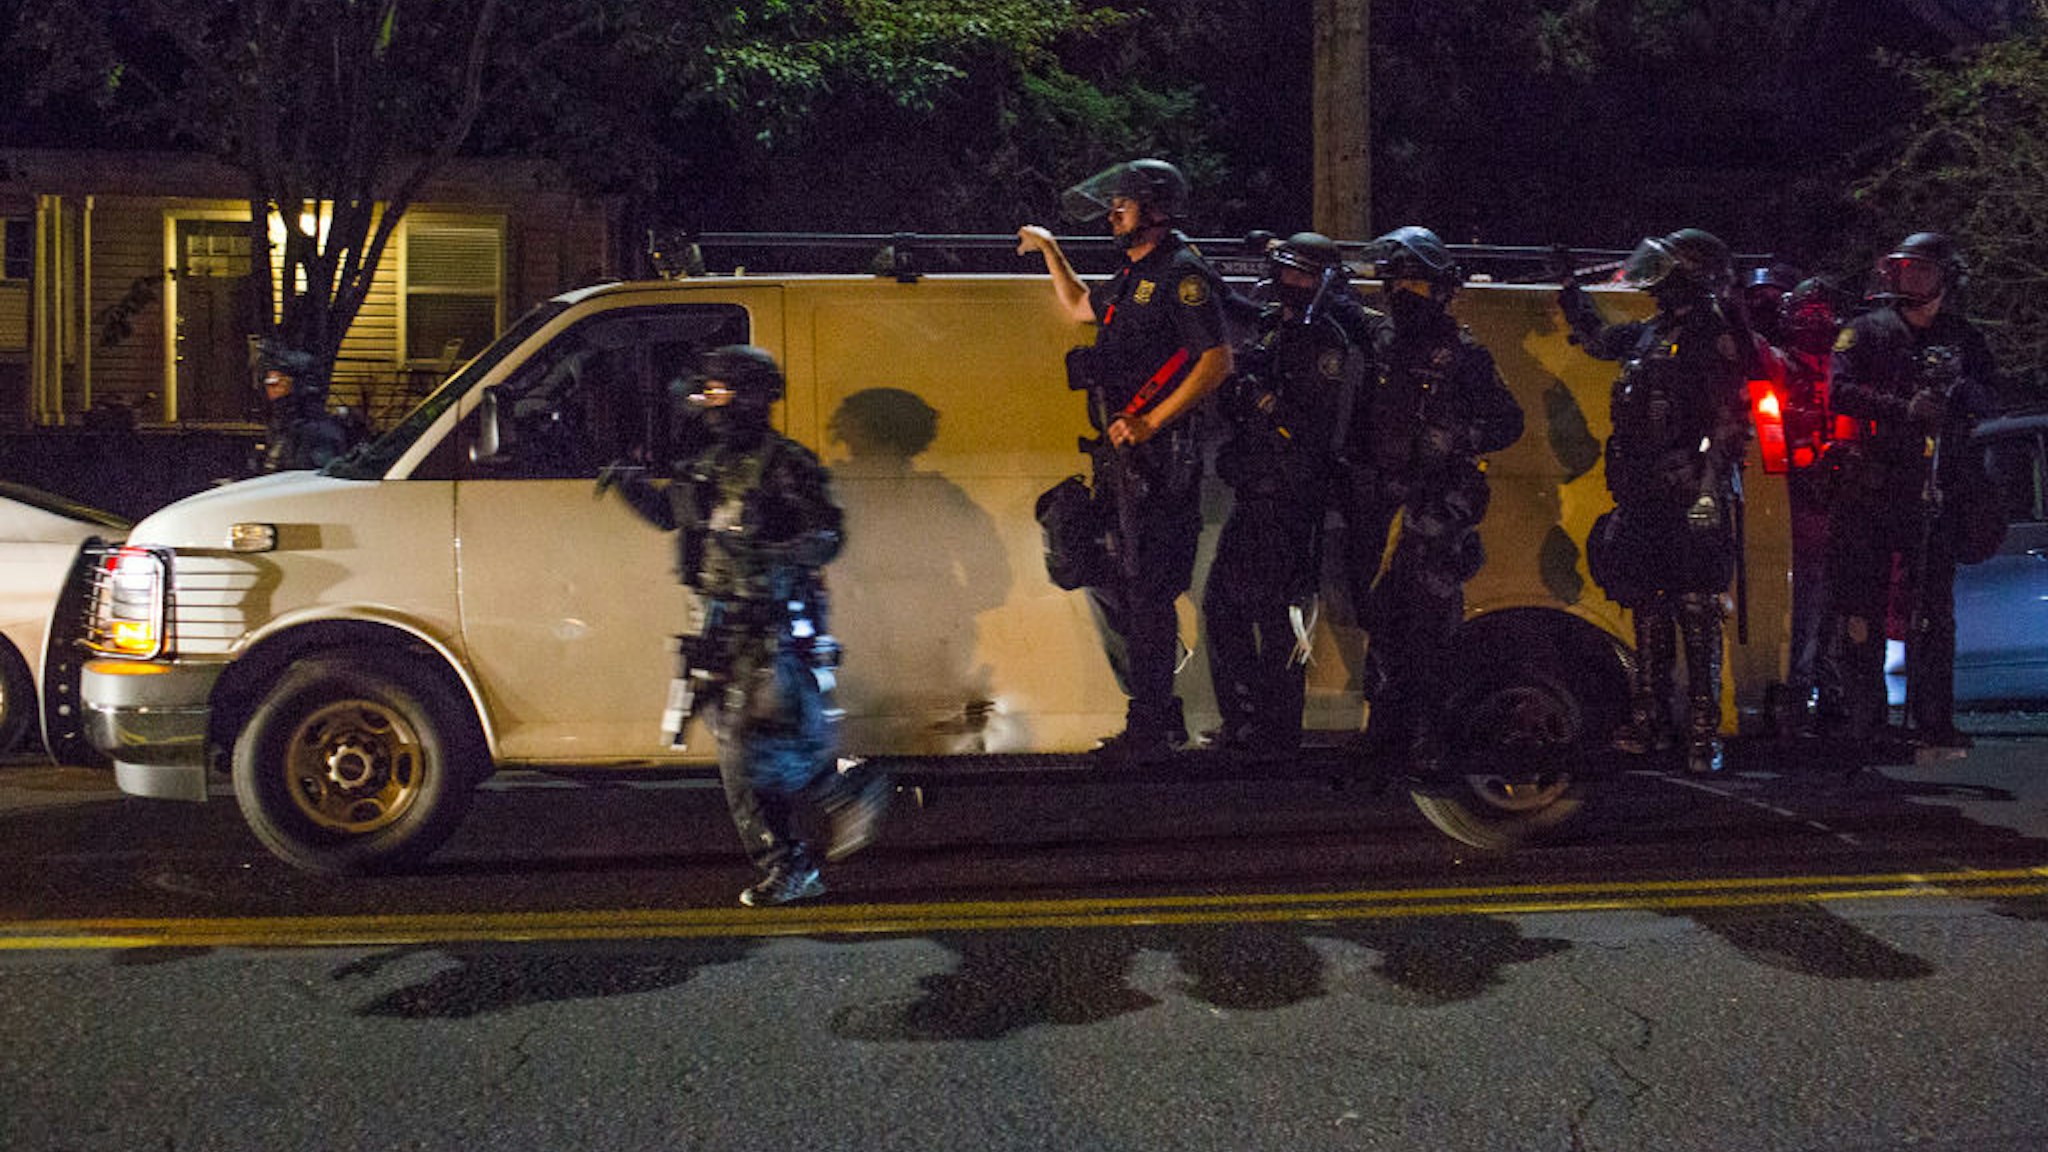 Portland police officers prepare to skirmish with protestors near the police union building on September 28, 2020 in North Portland, Oregon.